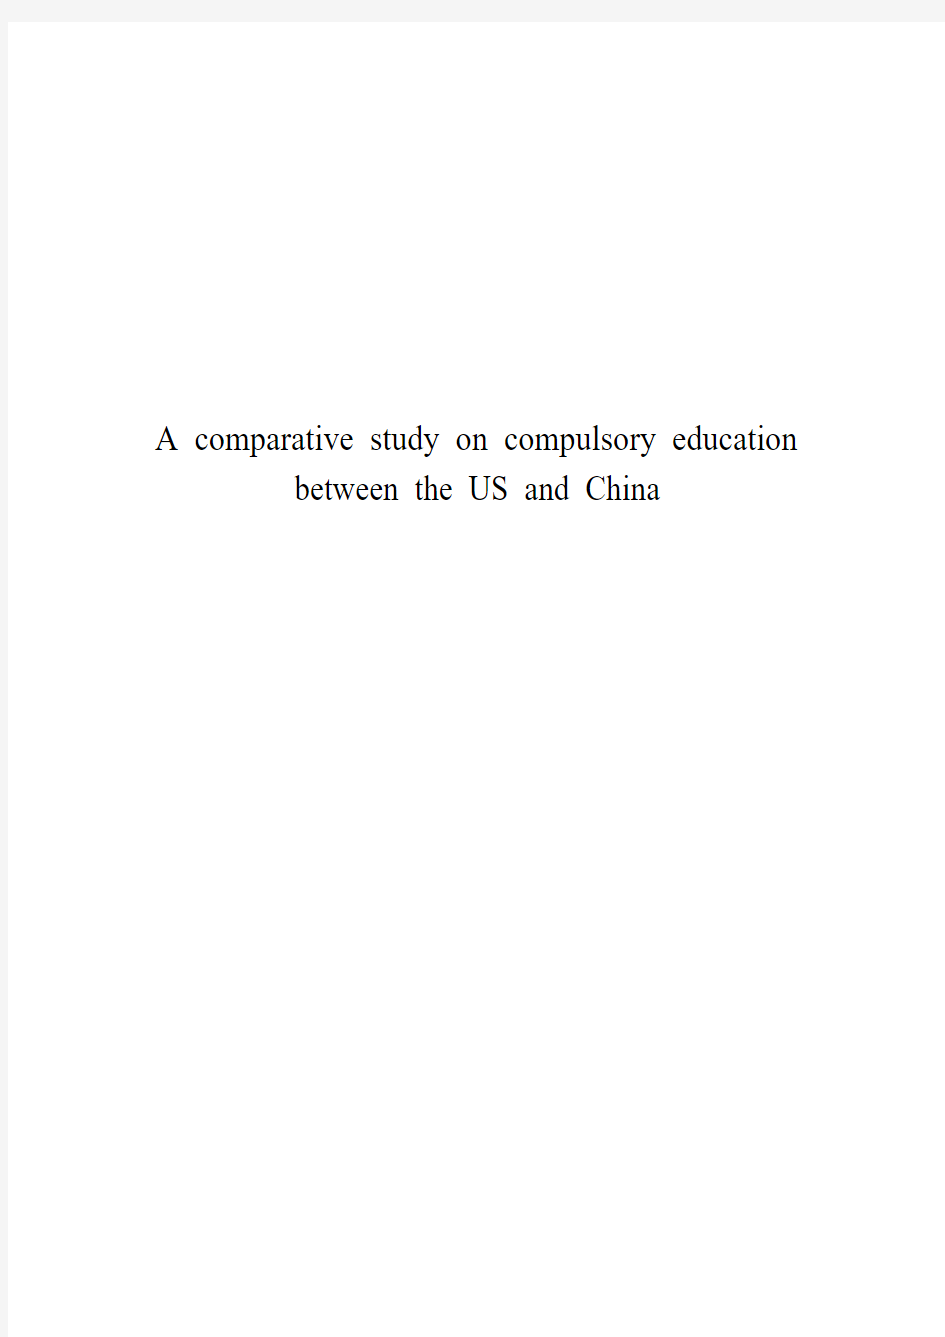 A comparative study on compulsory education between the US and China